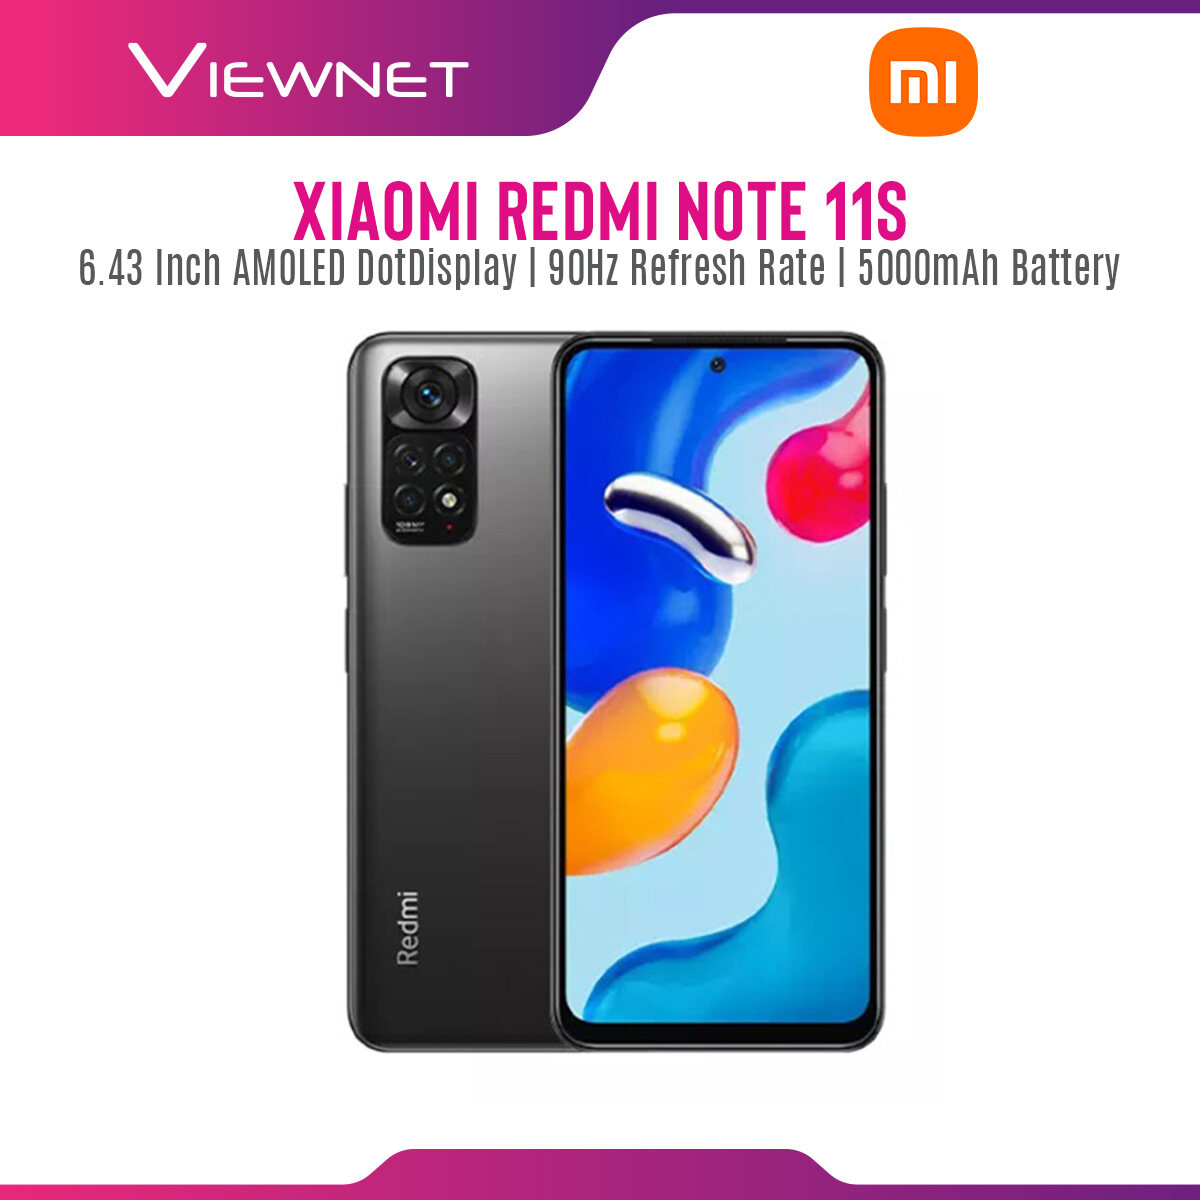 Xiaomi Redmi Note 11S 4G (8GB+128GB) ORIGINAL Smartphone FHD+| 108MP | 90Hz Refresh Rate Display | 5000mAh Battery and with 1 Year XIAOMI Malaysia Warranty ( Graphite Gray ) 